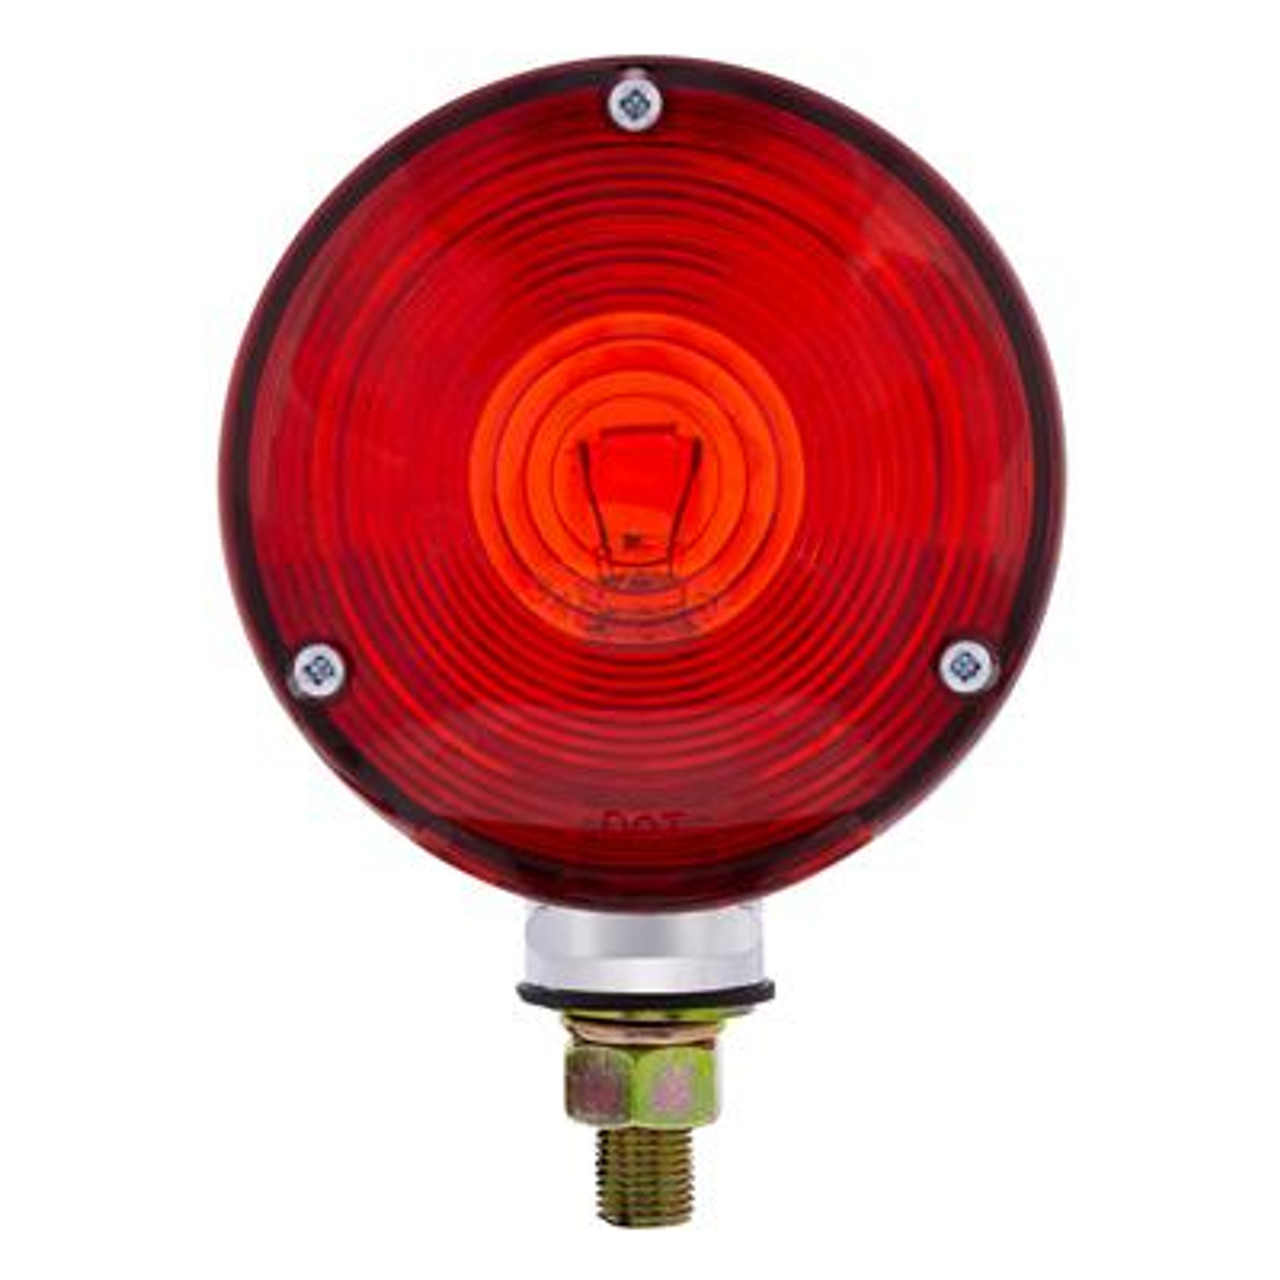 Double Face Turn Signal Light With 1157 Bulb - Amber & Red Lens